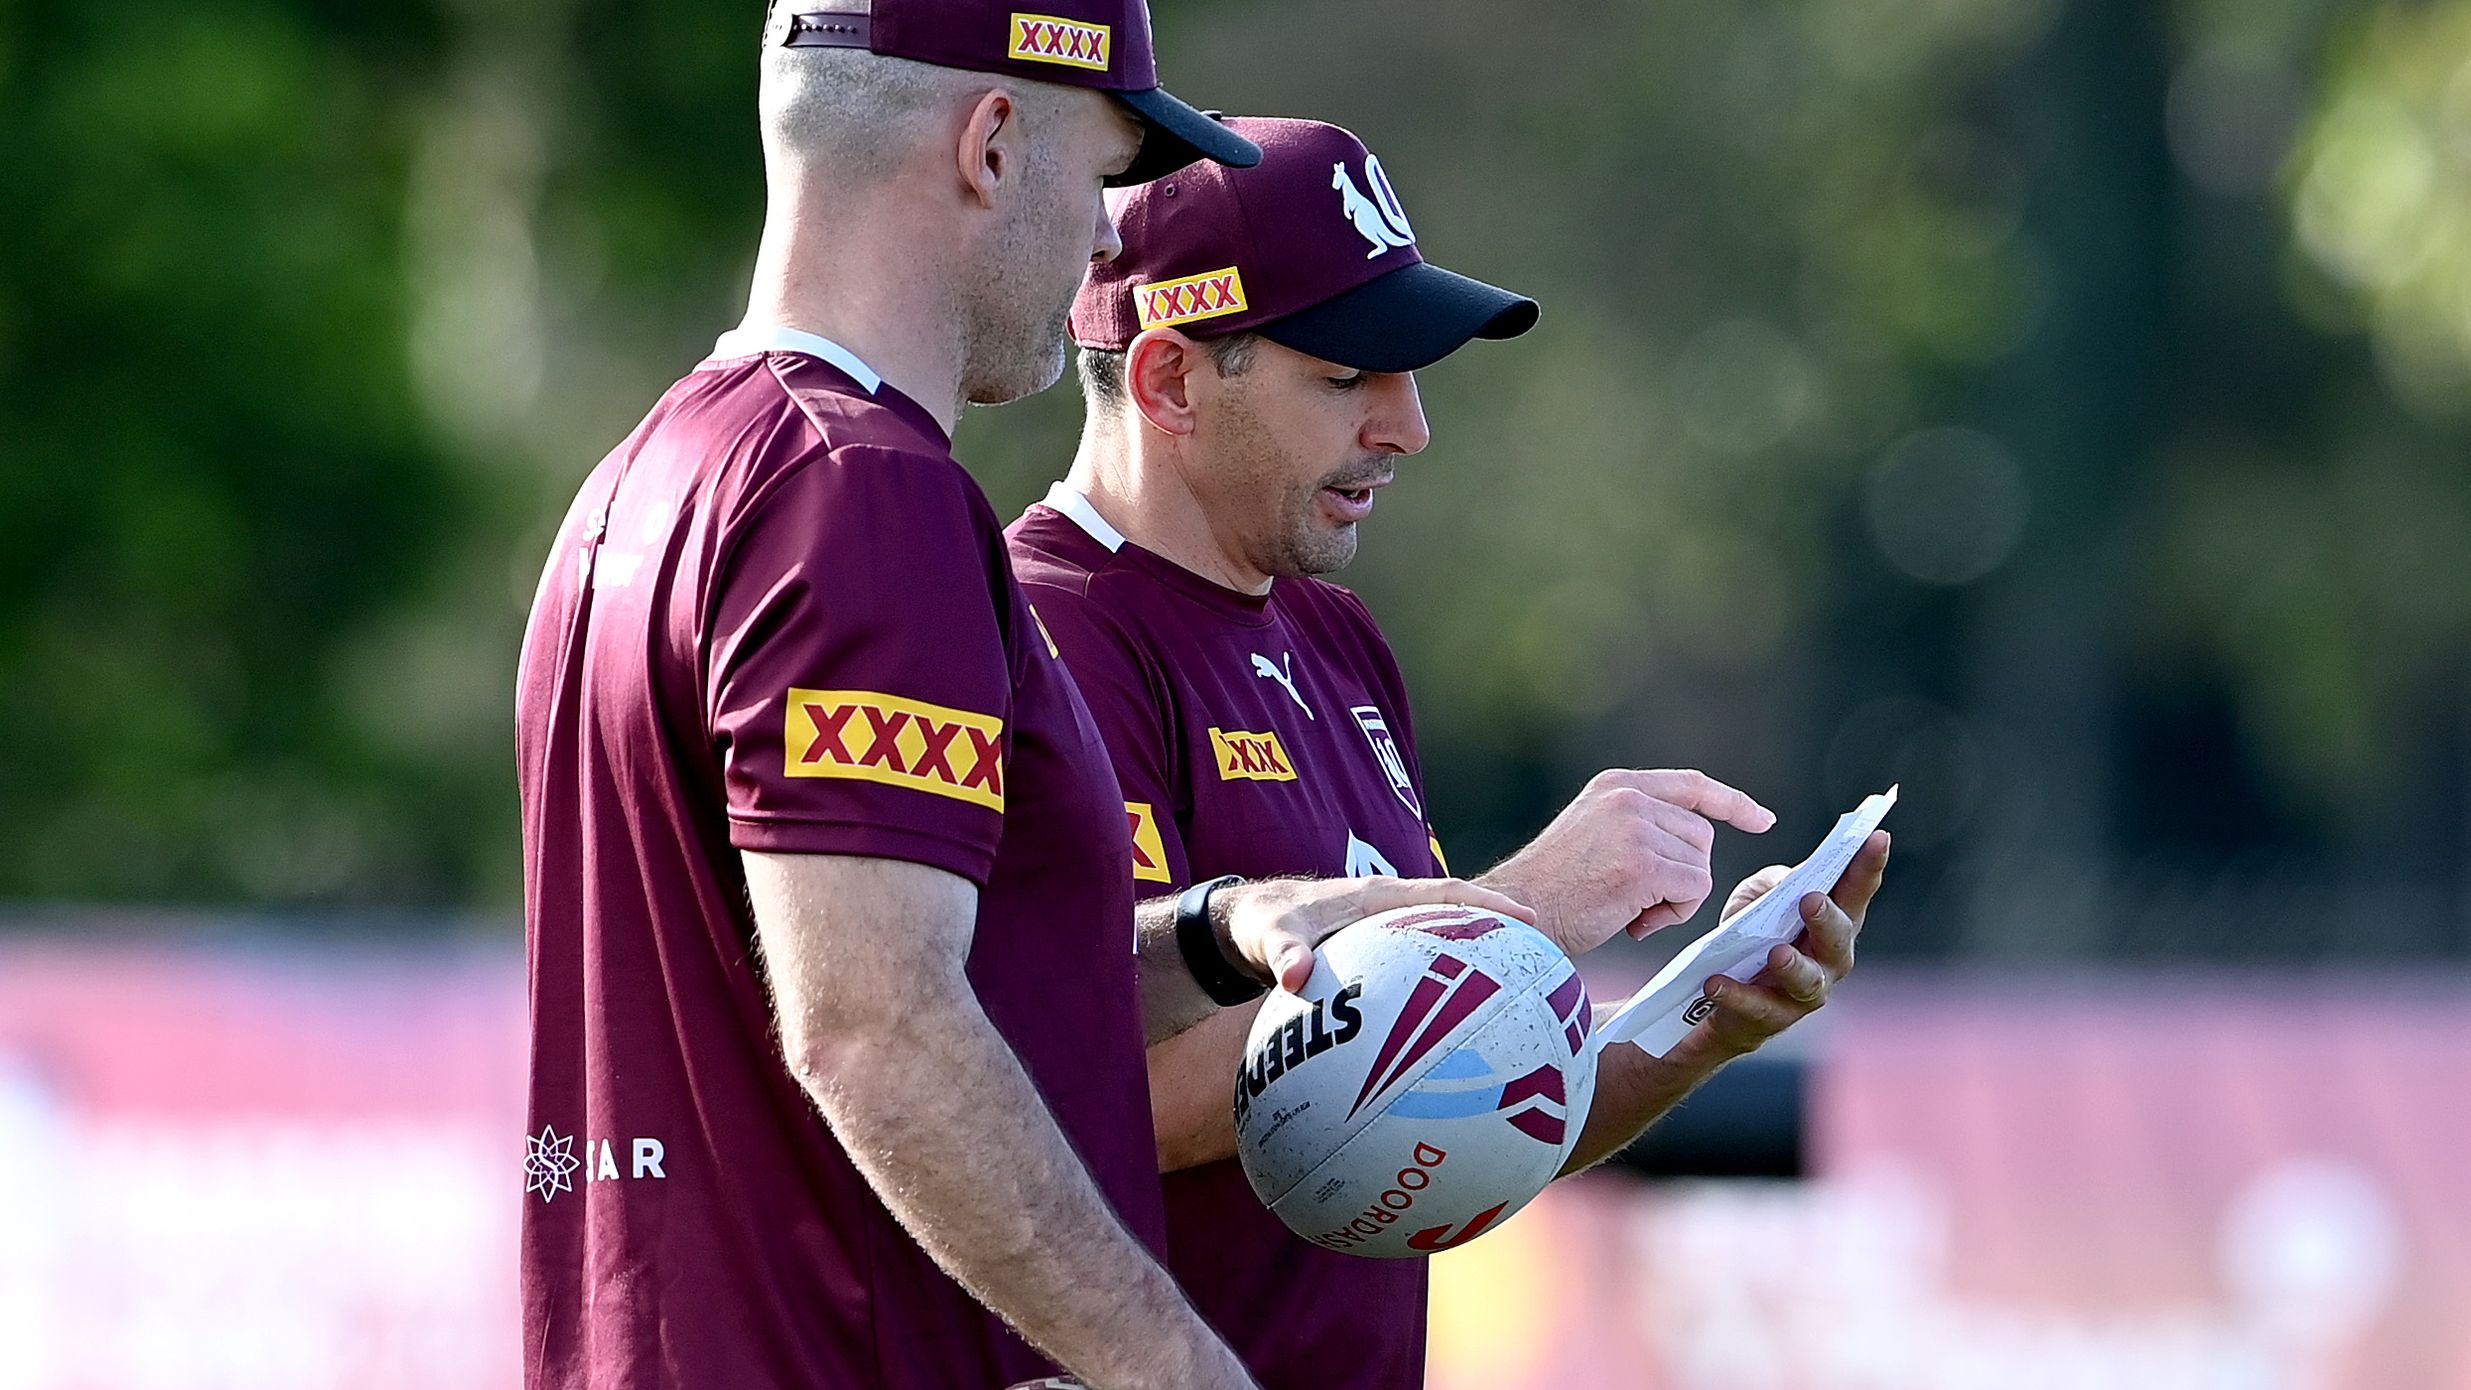 Coach Billy Slater and his assistant Nate Myles are seen talking tactics during a Queensland Maroons training session at Sanctuary Cove.